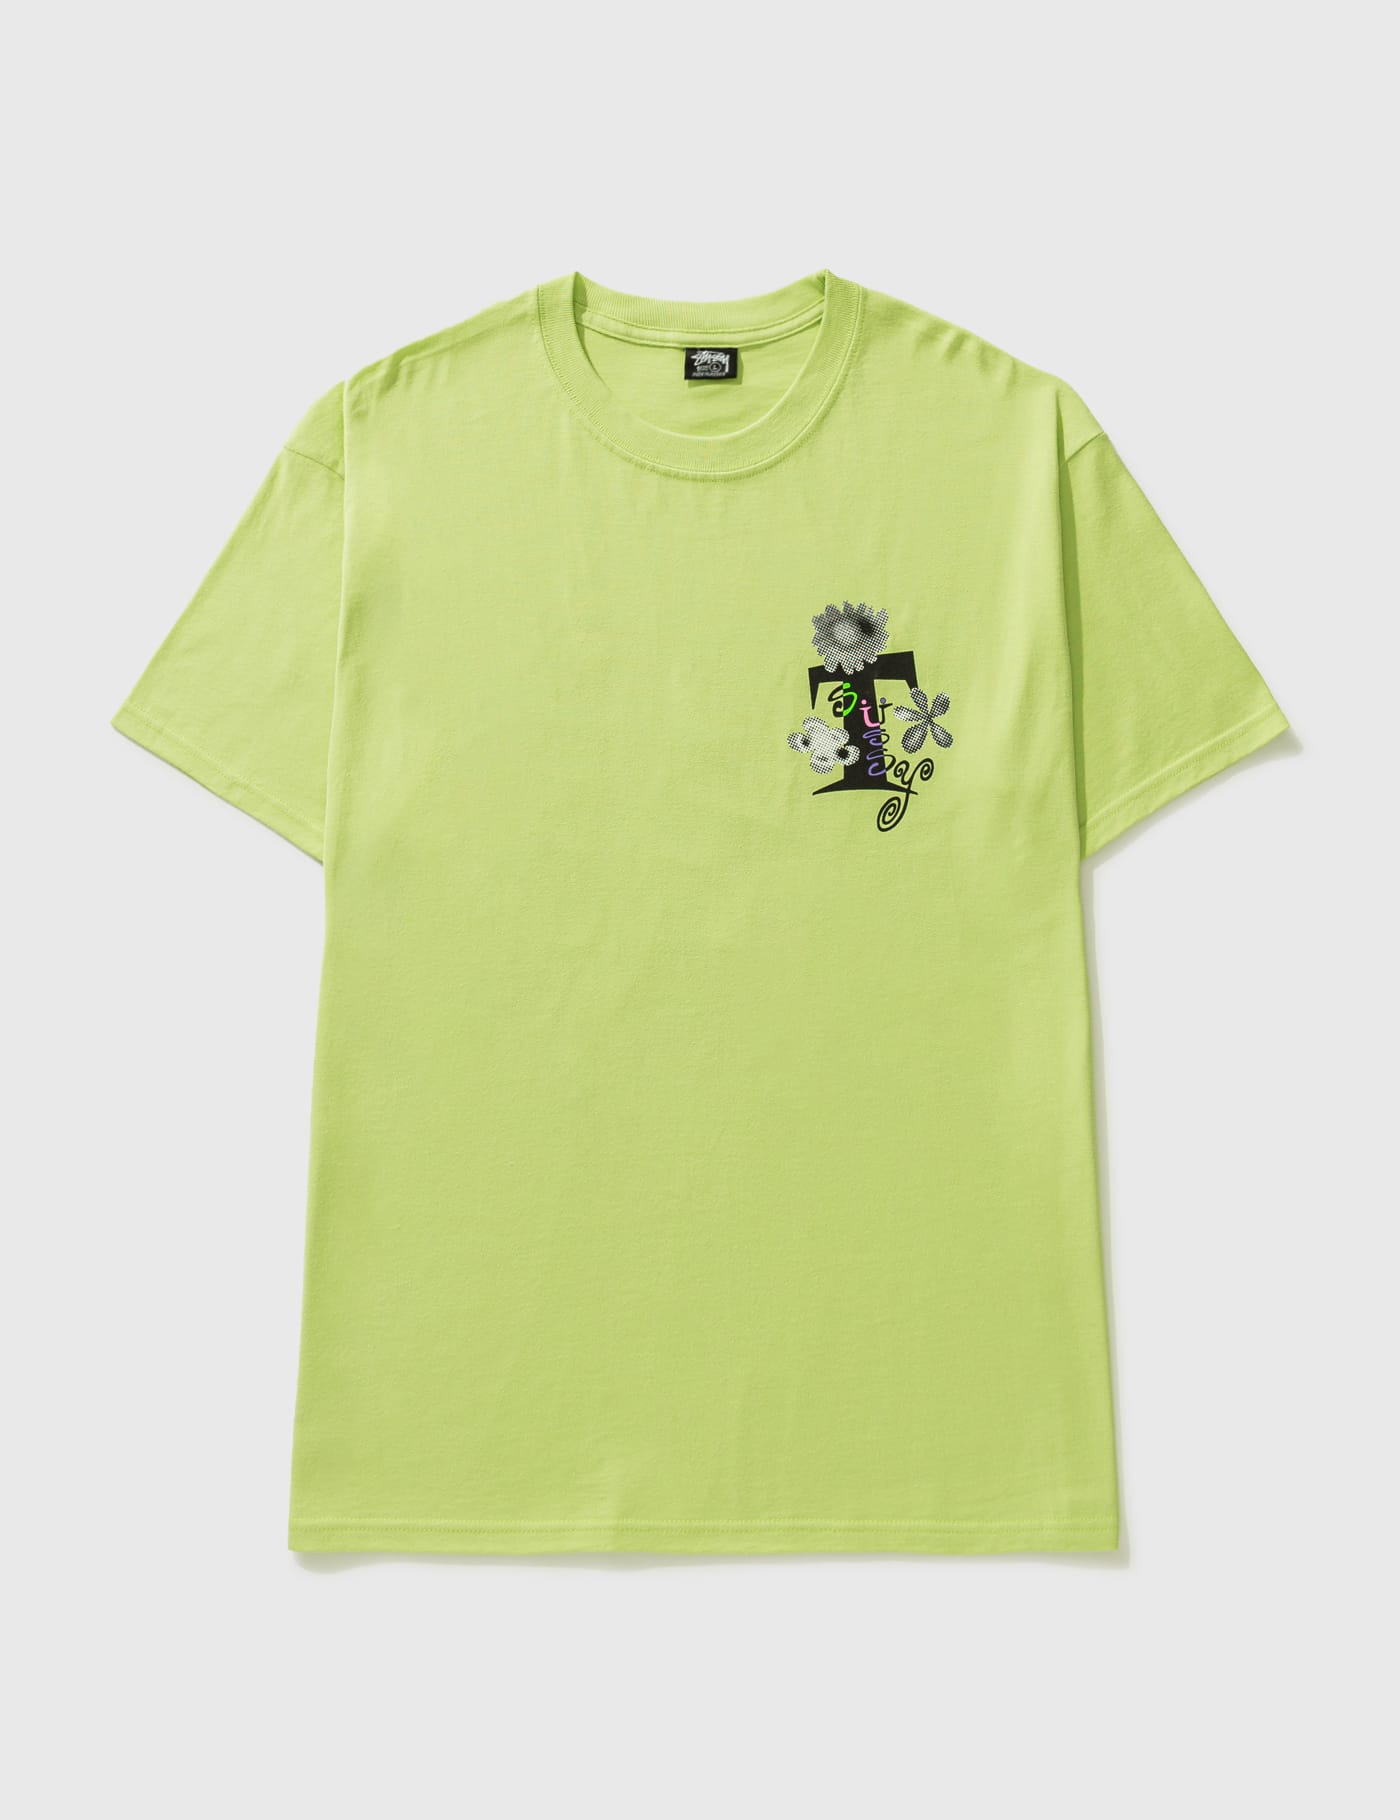 Stussy - Acid Flowers T-shirt | HBX - Globally Curated Fashion and 